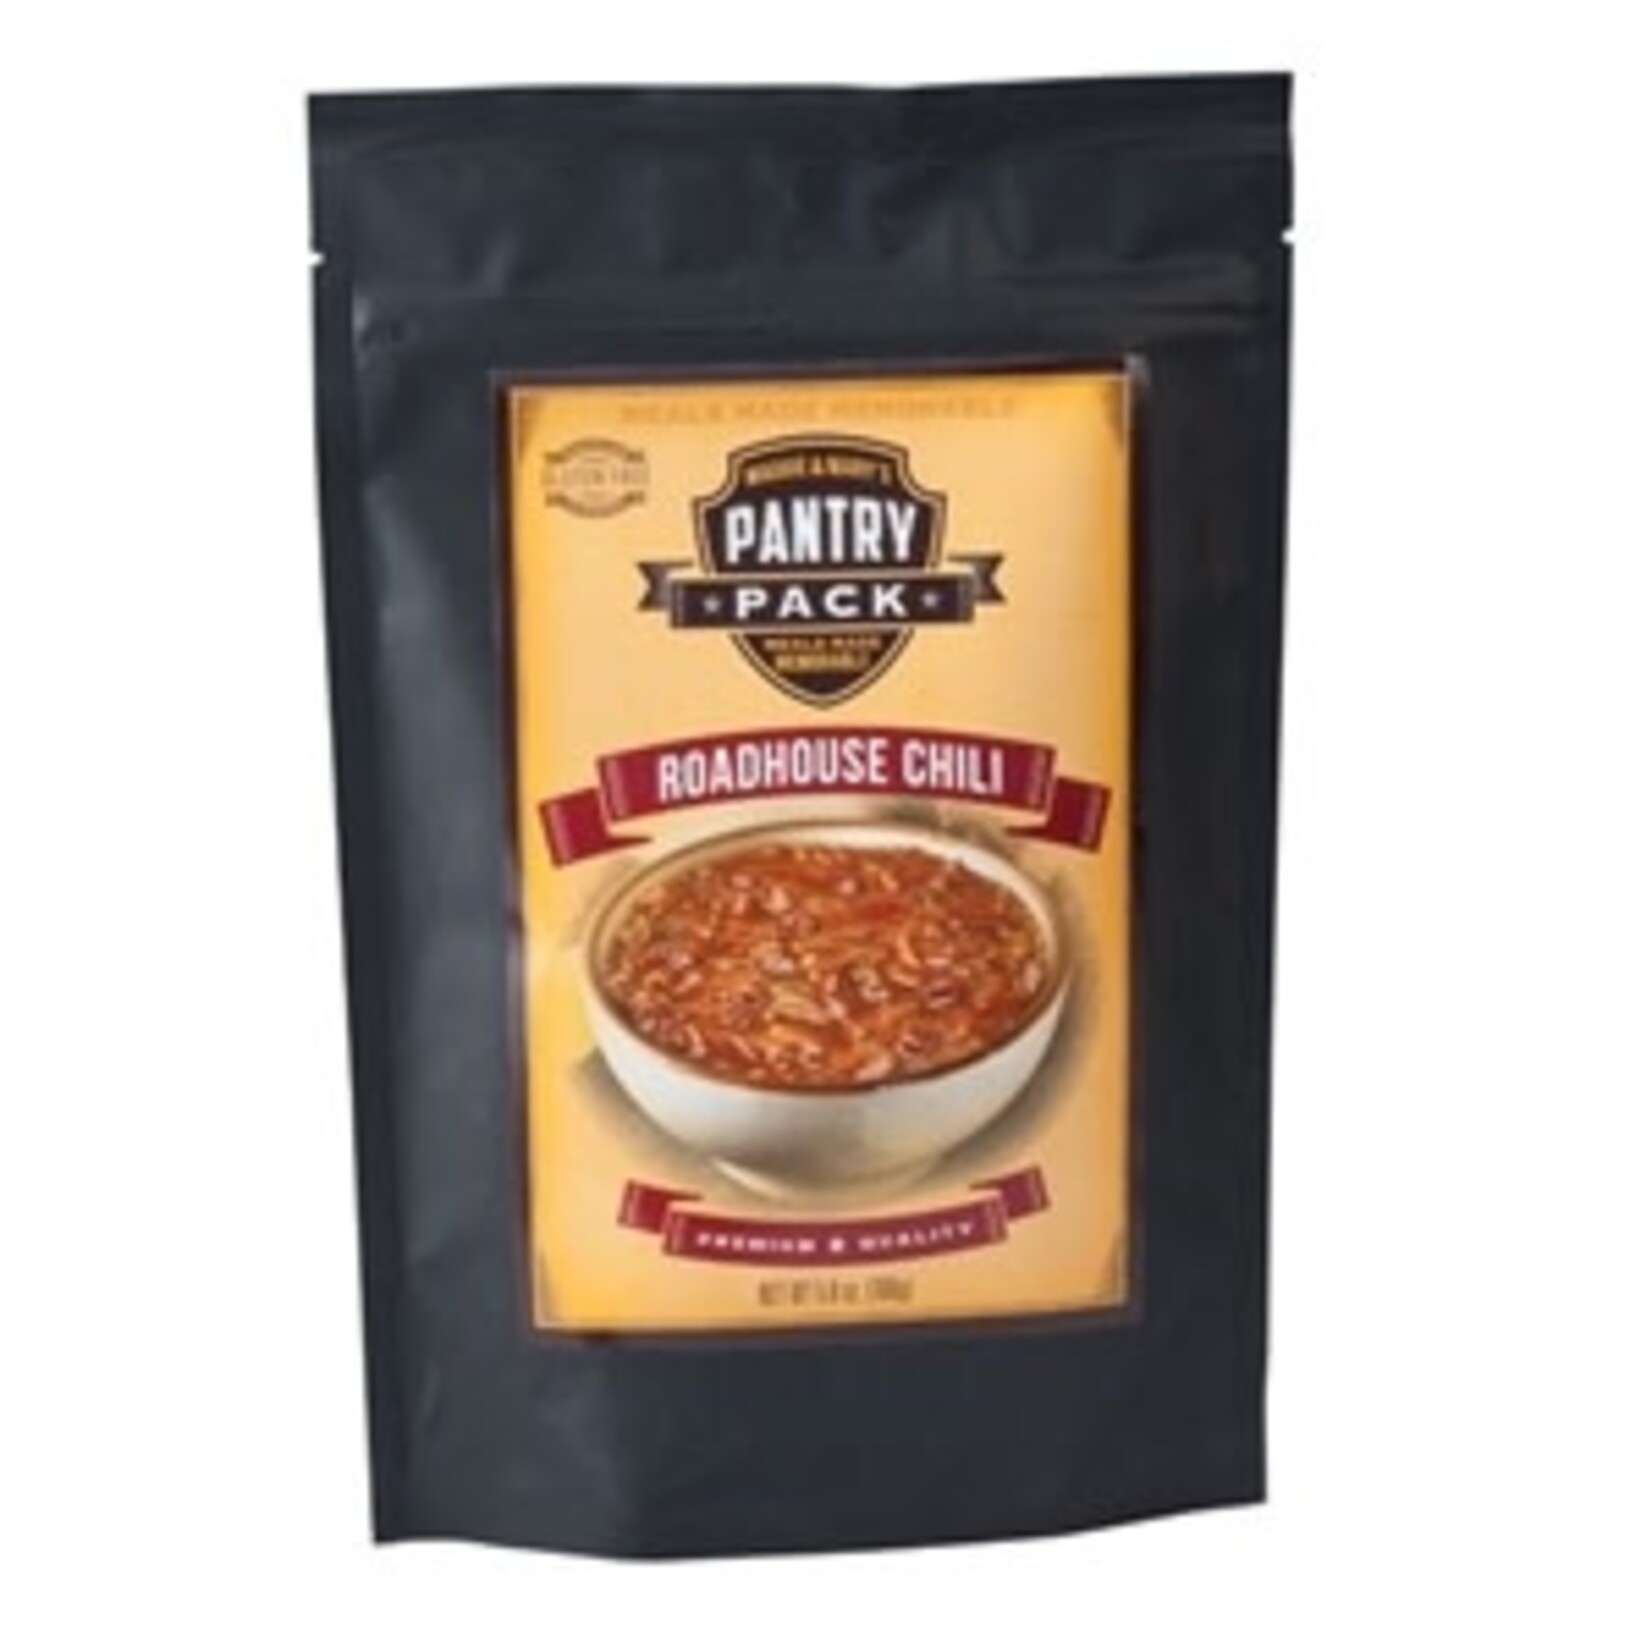 Maggie & Mary's Pantry Pack Roadhouse Chili